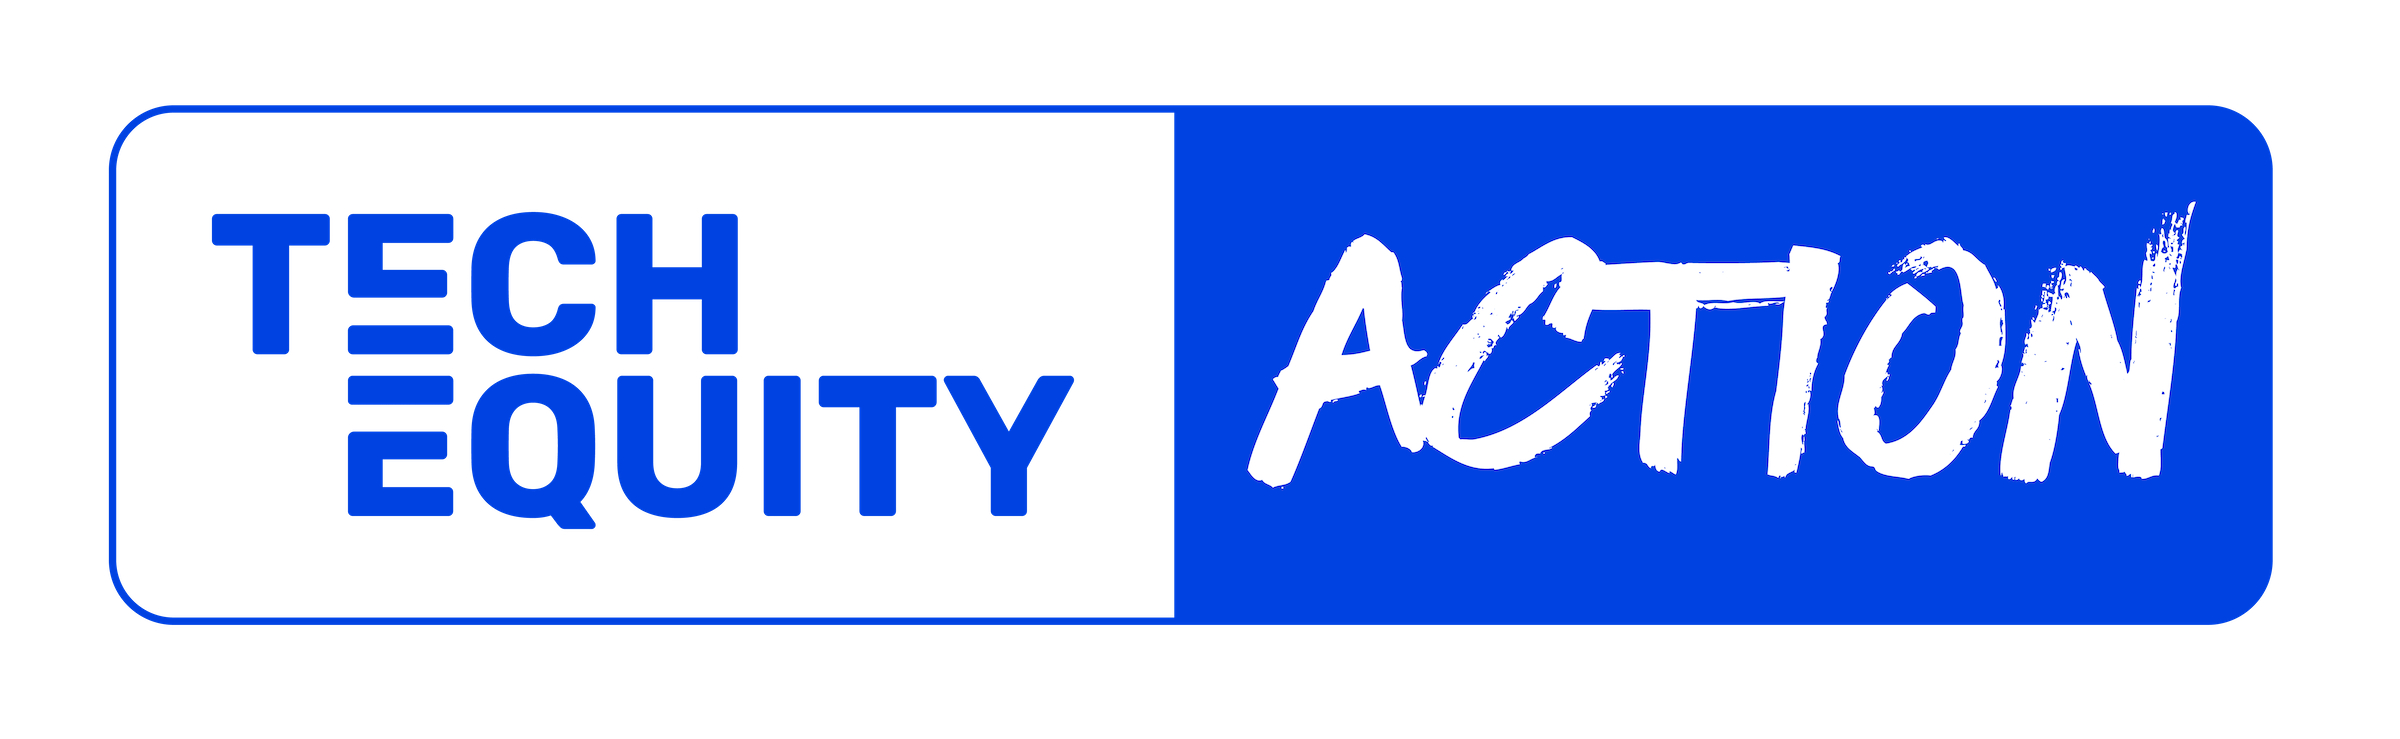 TechEquity Action Footer Logo